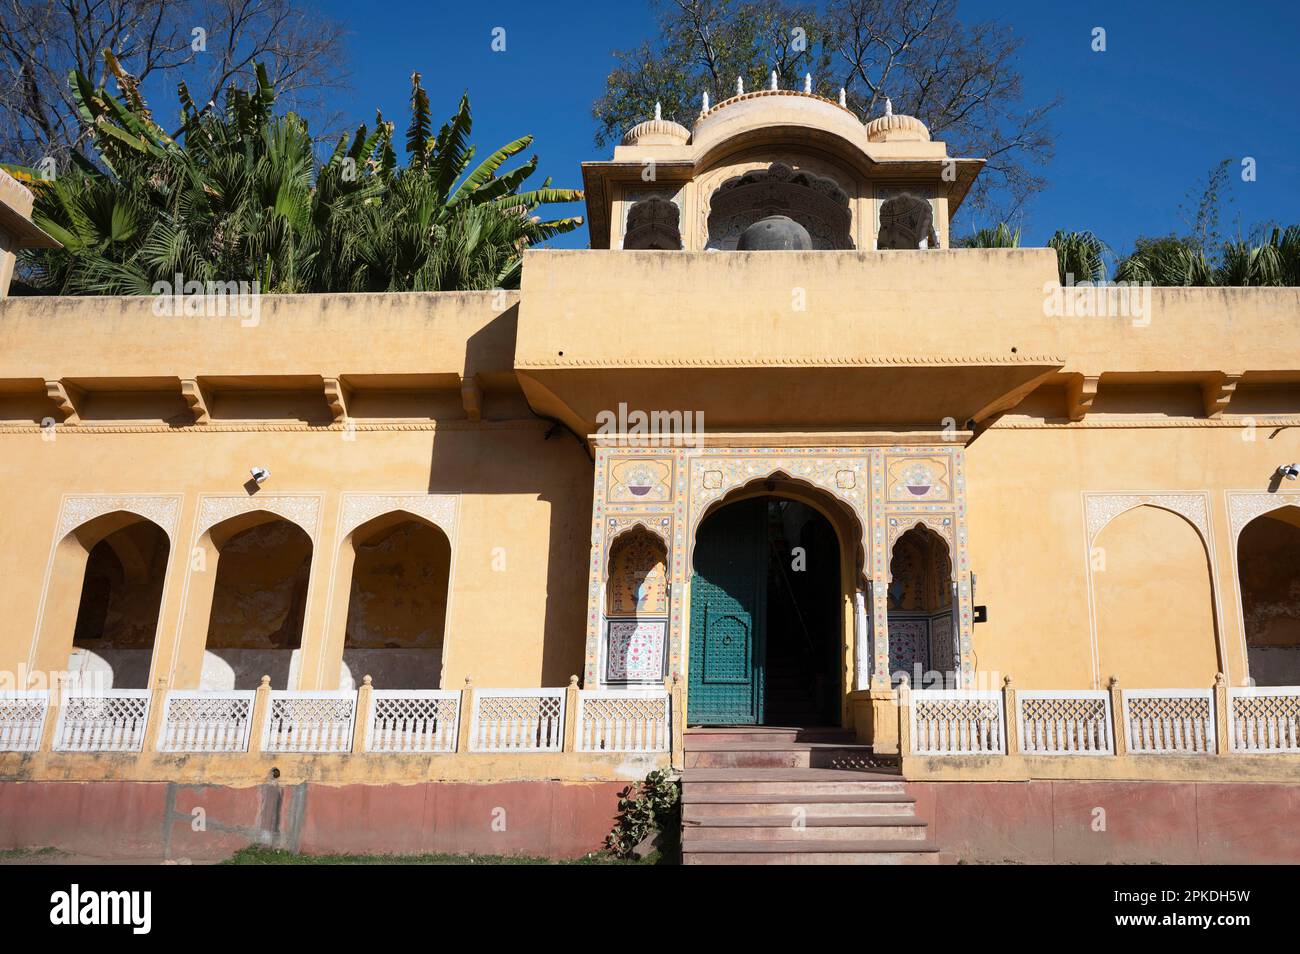 Old building converted into a restaurant, near Sisodia Rani Palace and Garden, located in Jaipur, Rajasthan, India Stock Photo